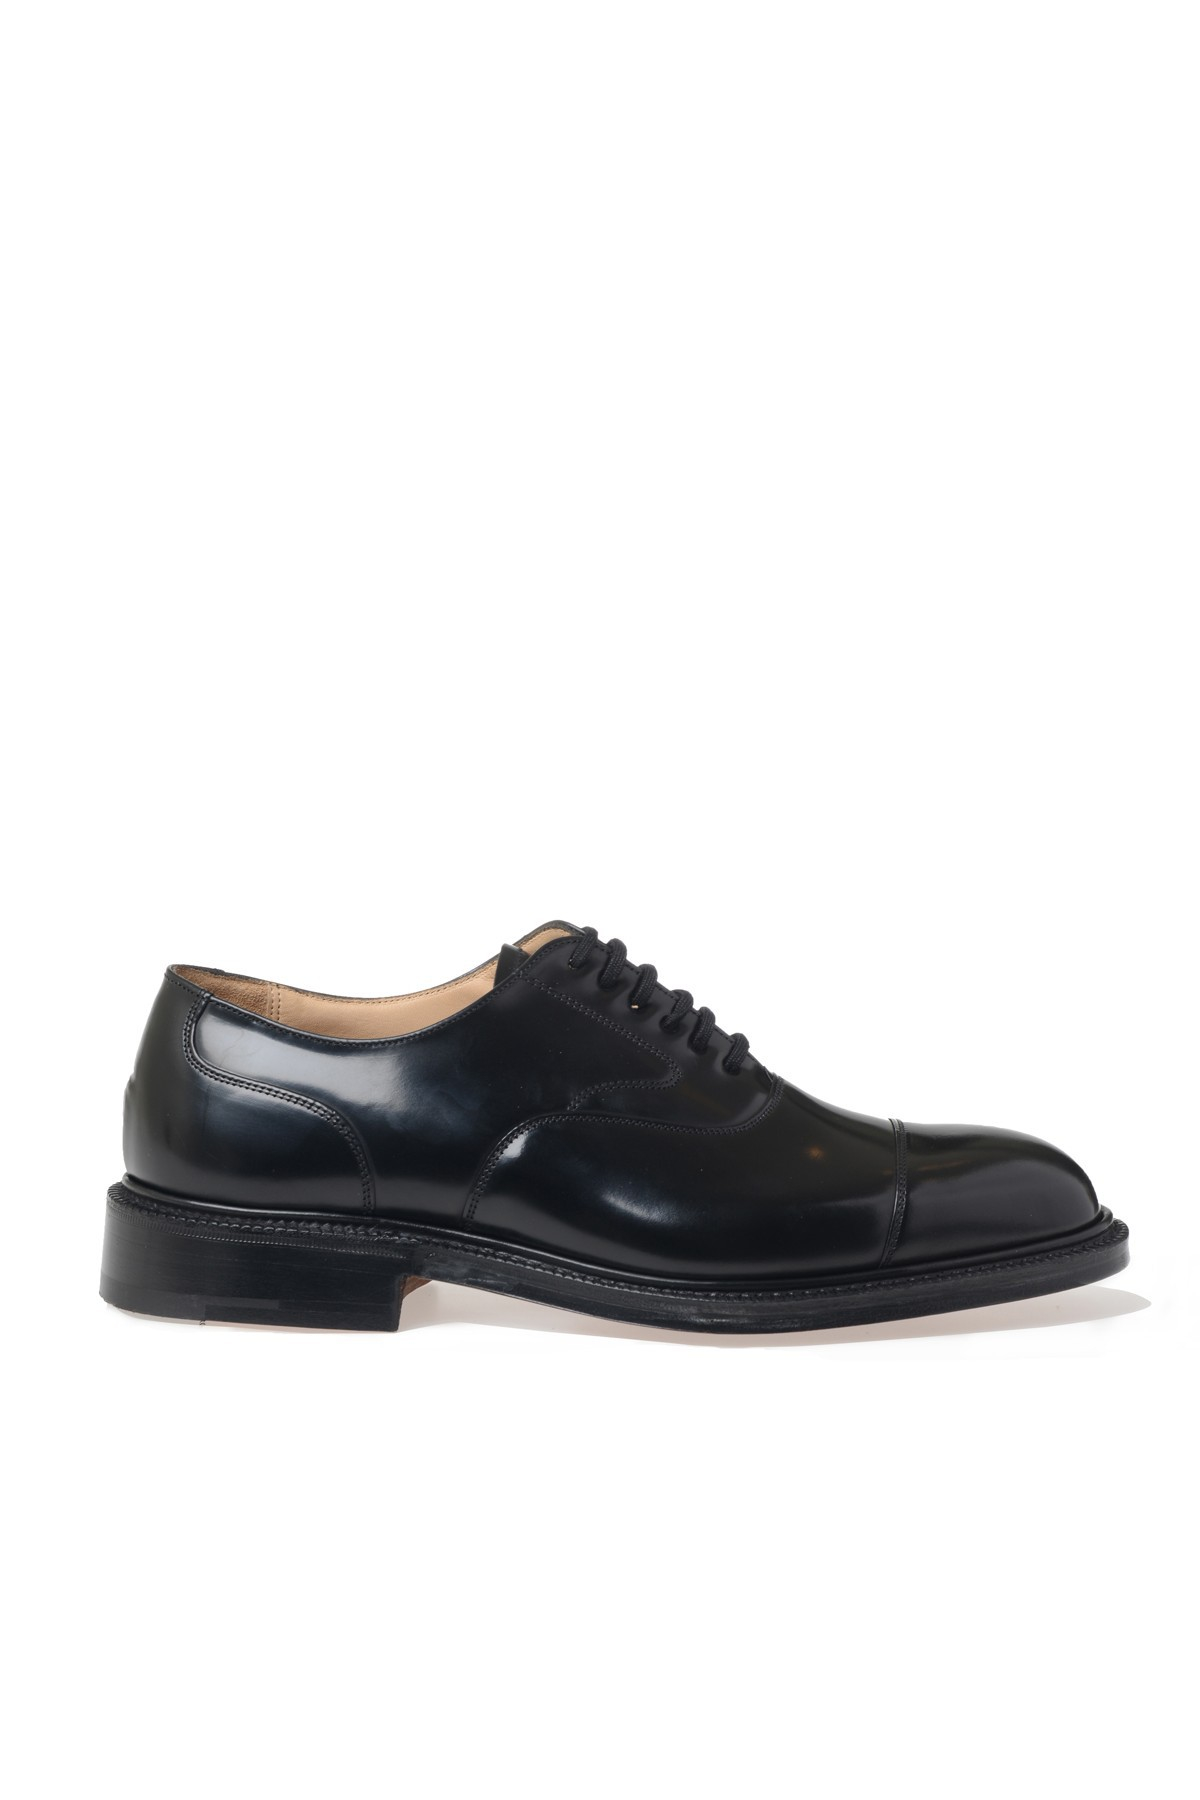 Church's | Black Churchs Patent Leather Lace Up Shoes for Men | Lyst